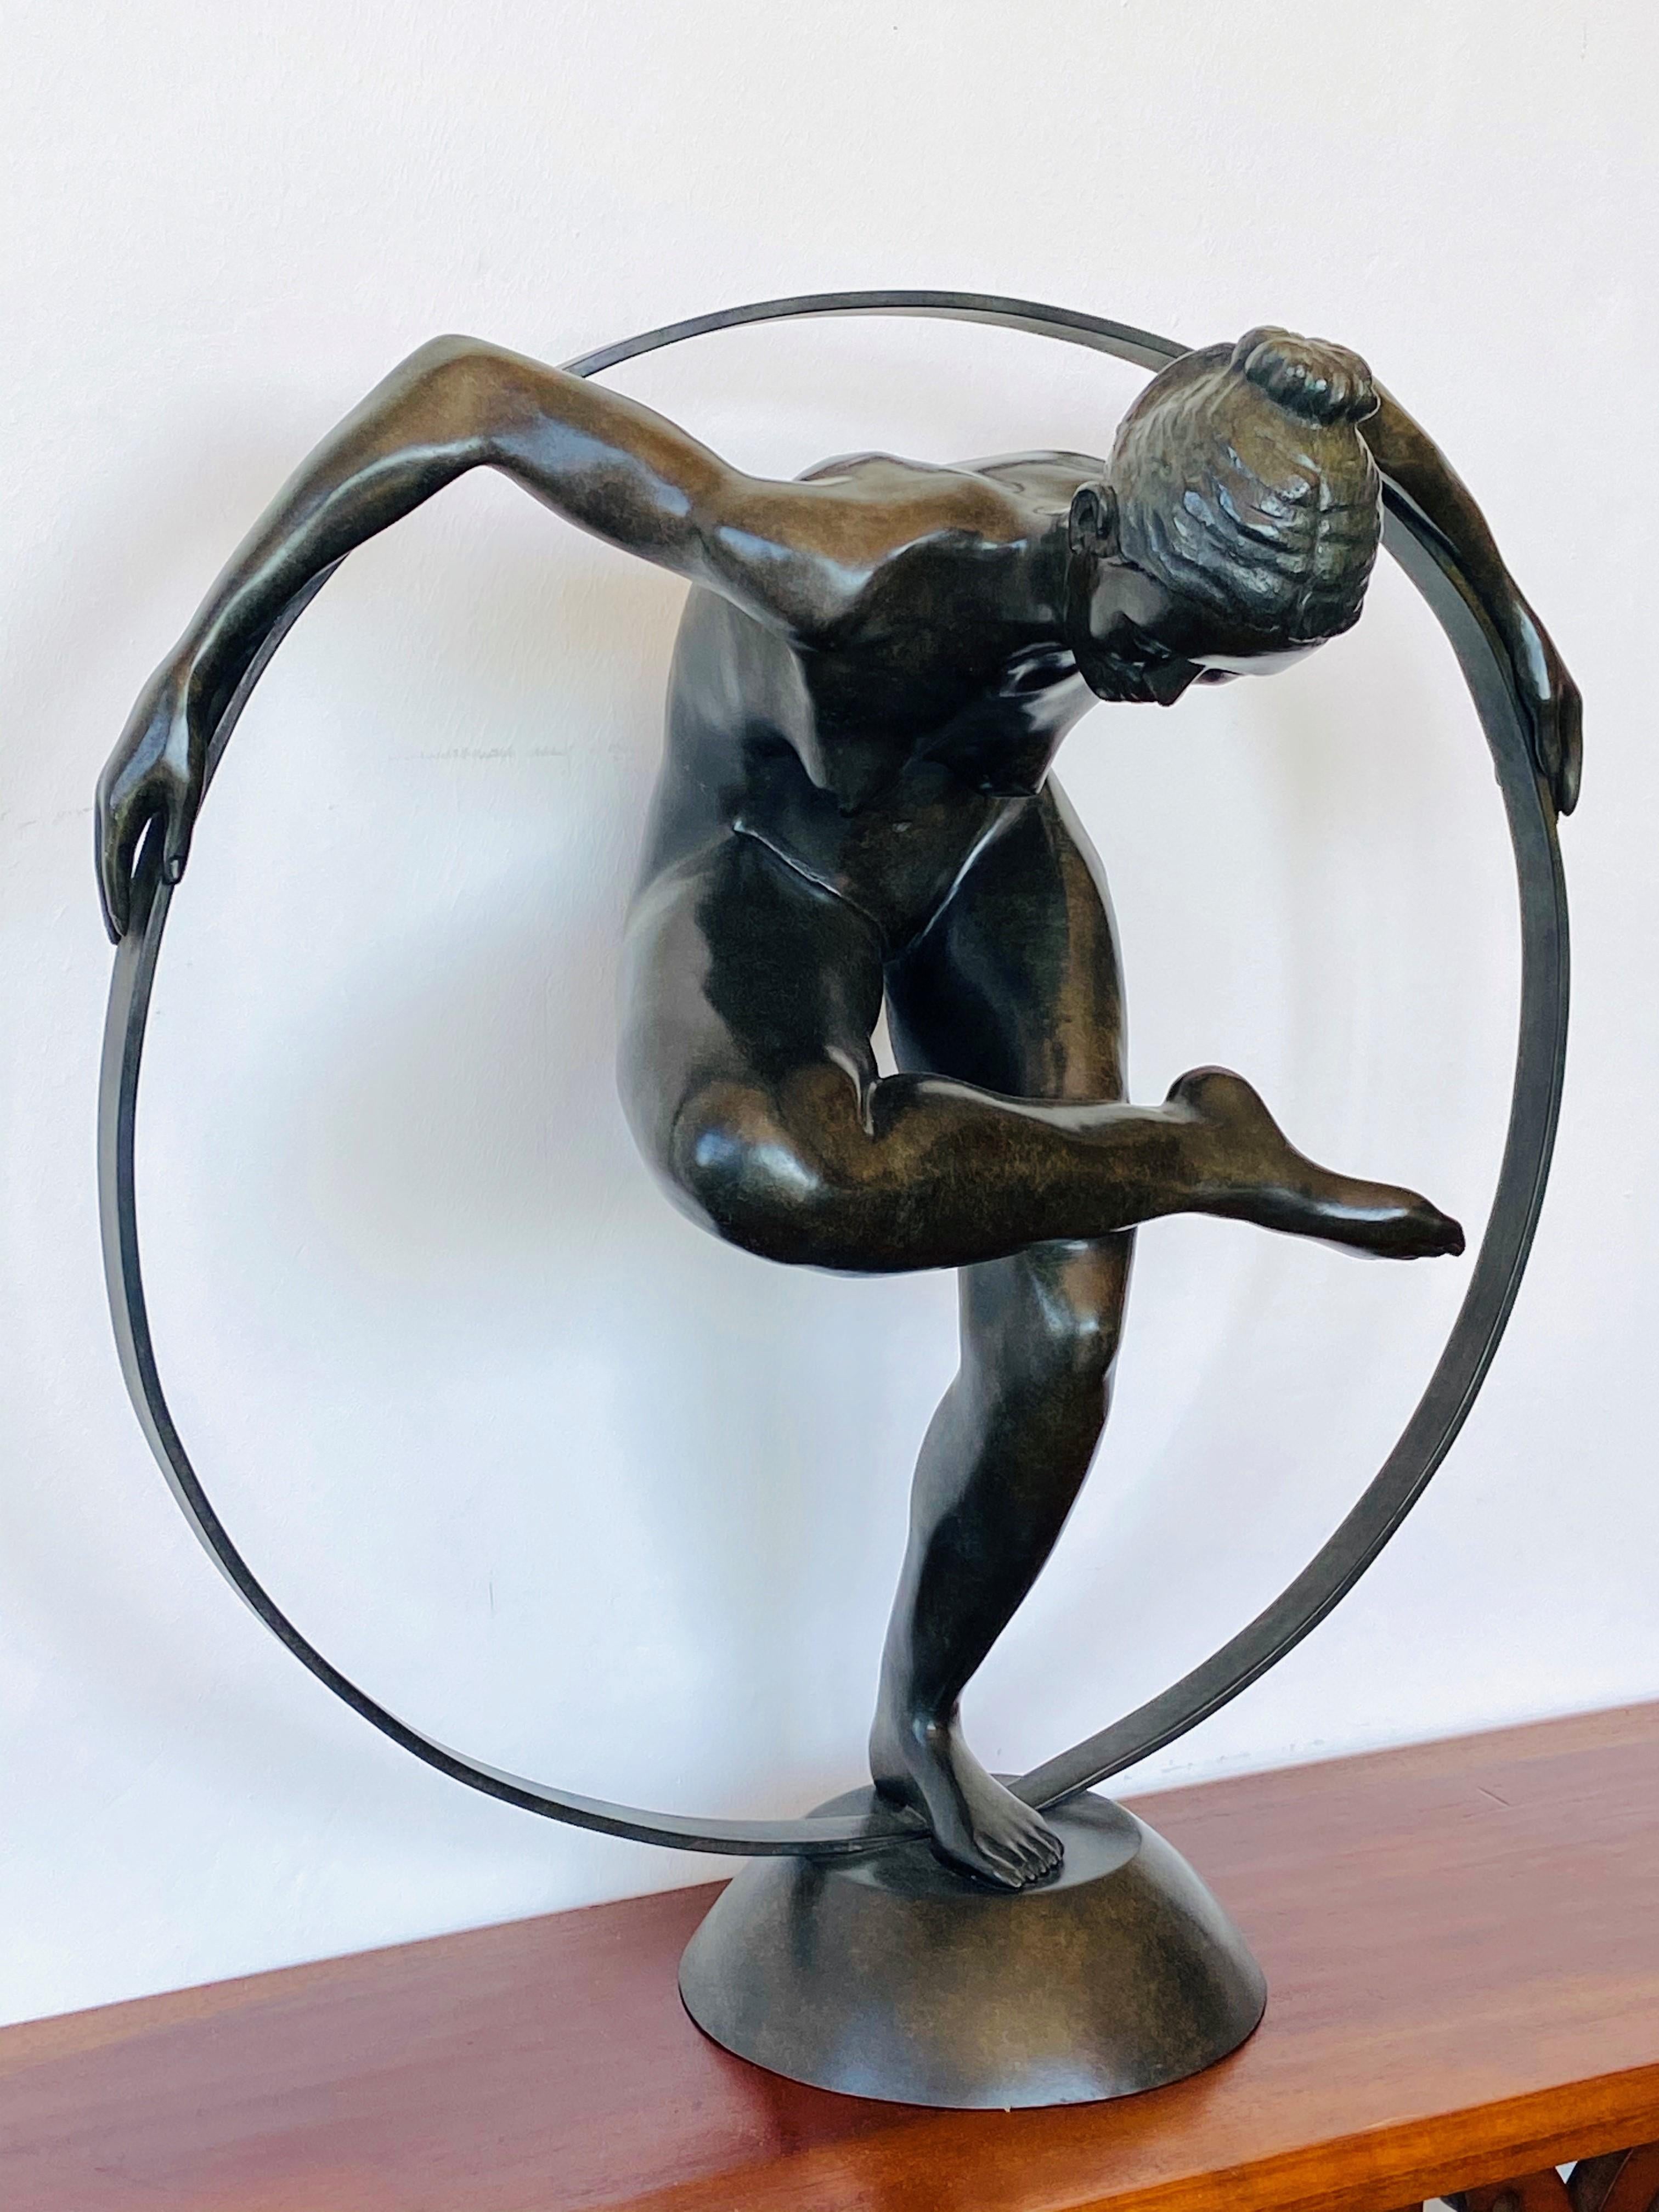 Taking Off - Sculpture by Patrick Brun